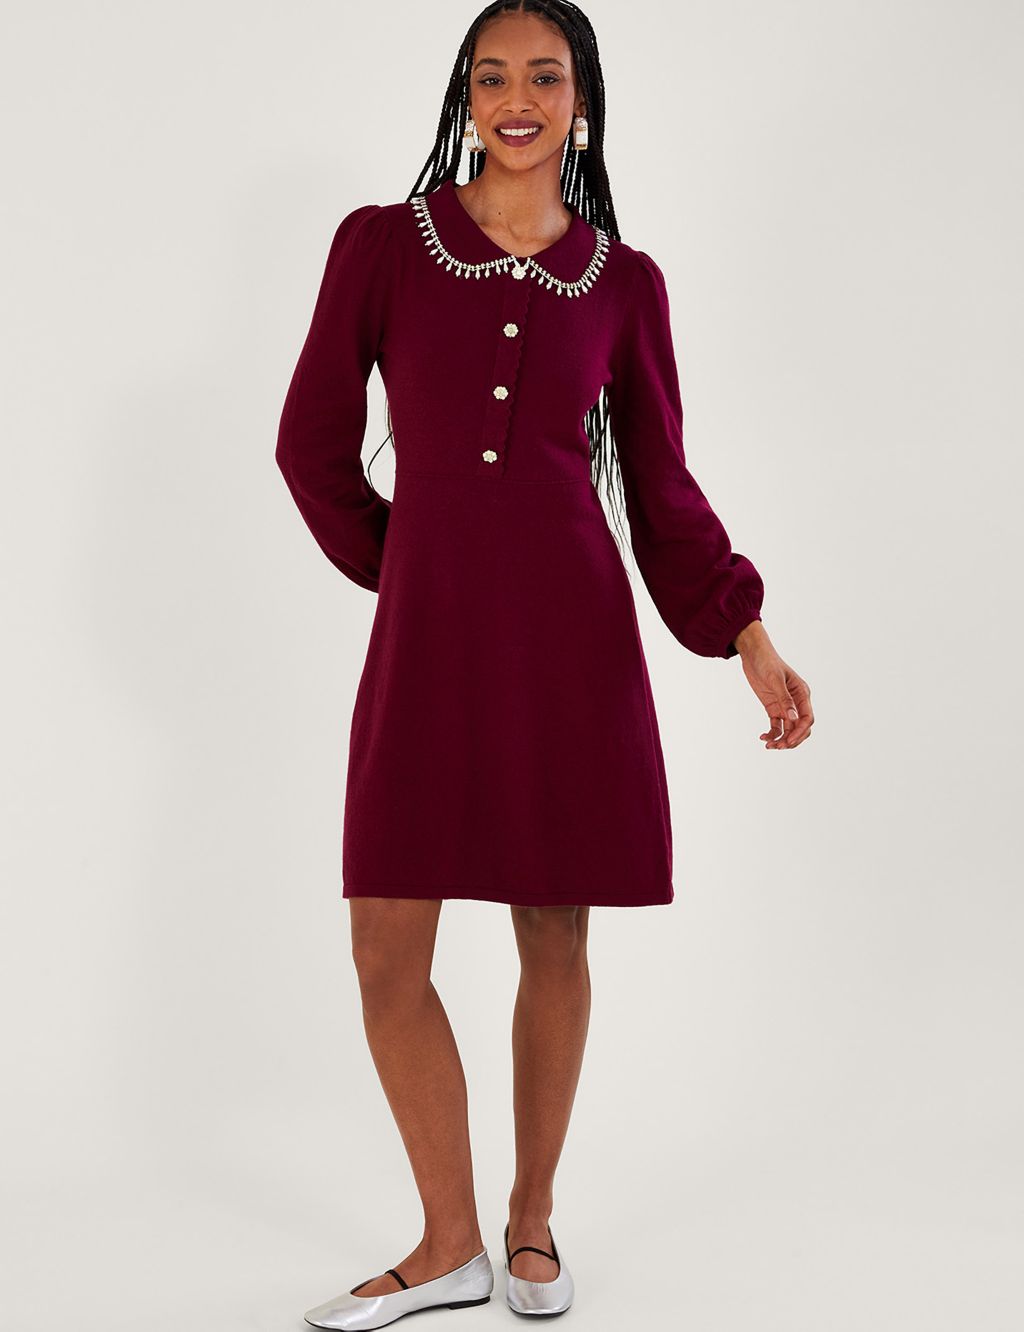 Collared Button Front Mini Shift Dress image 1